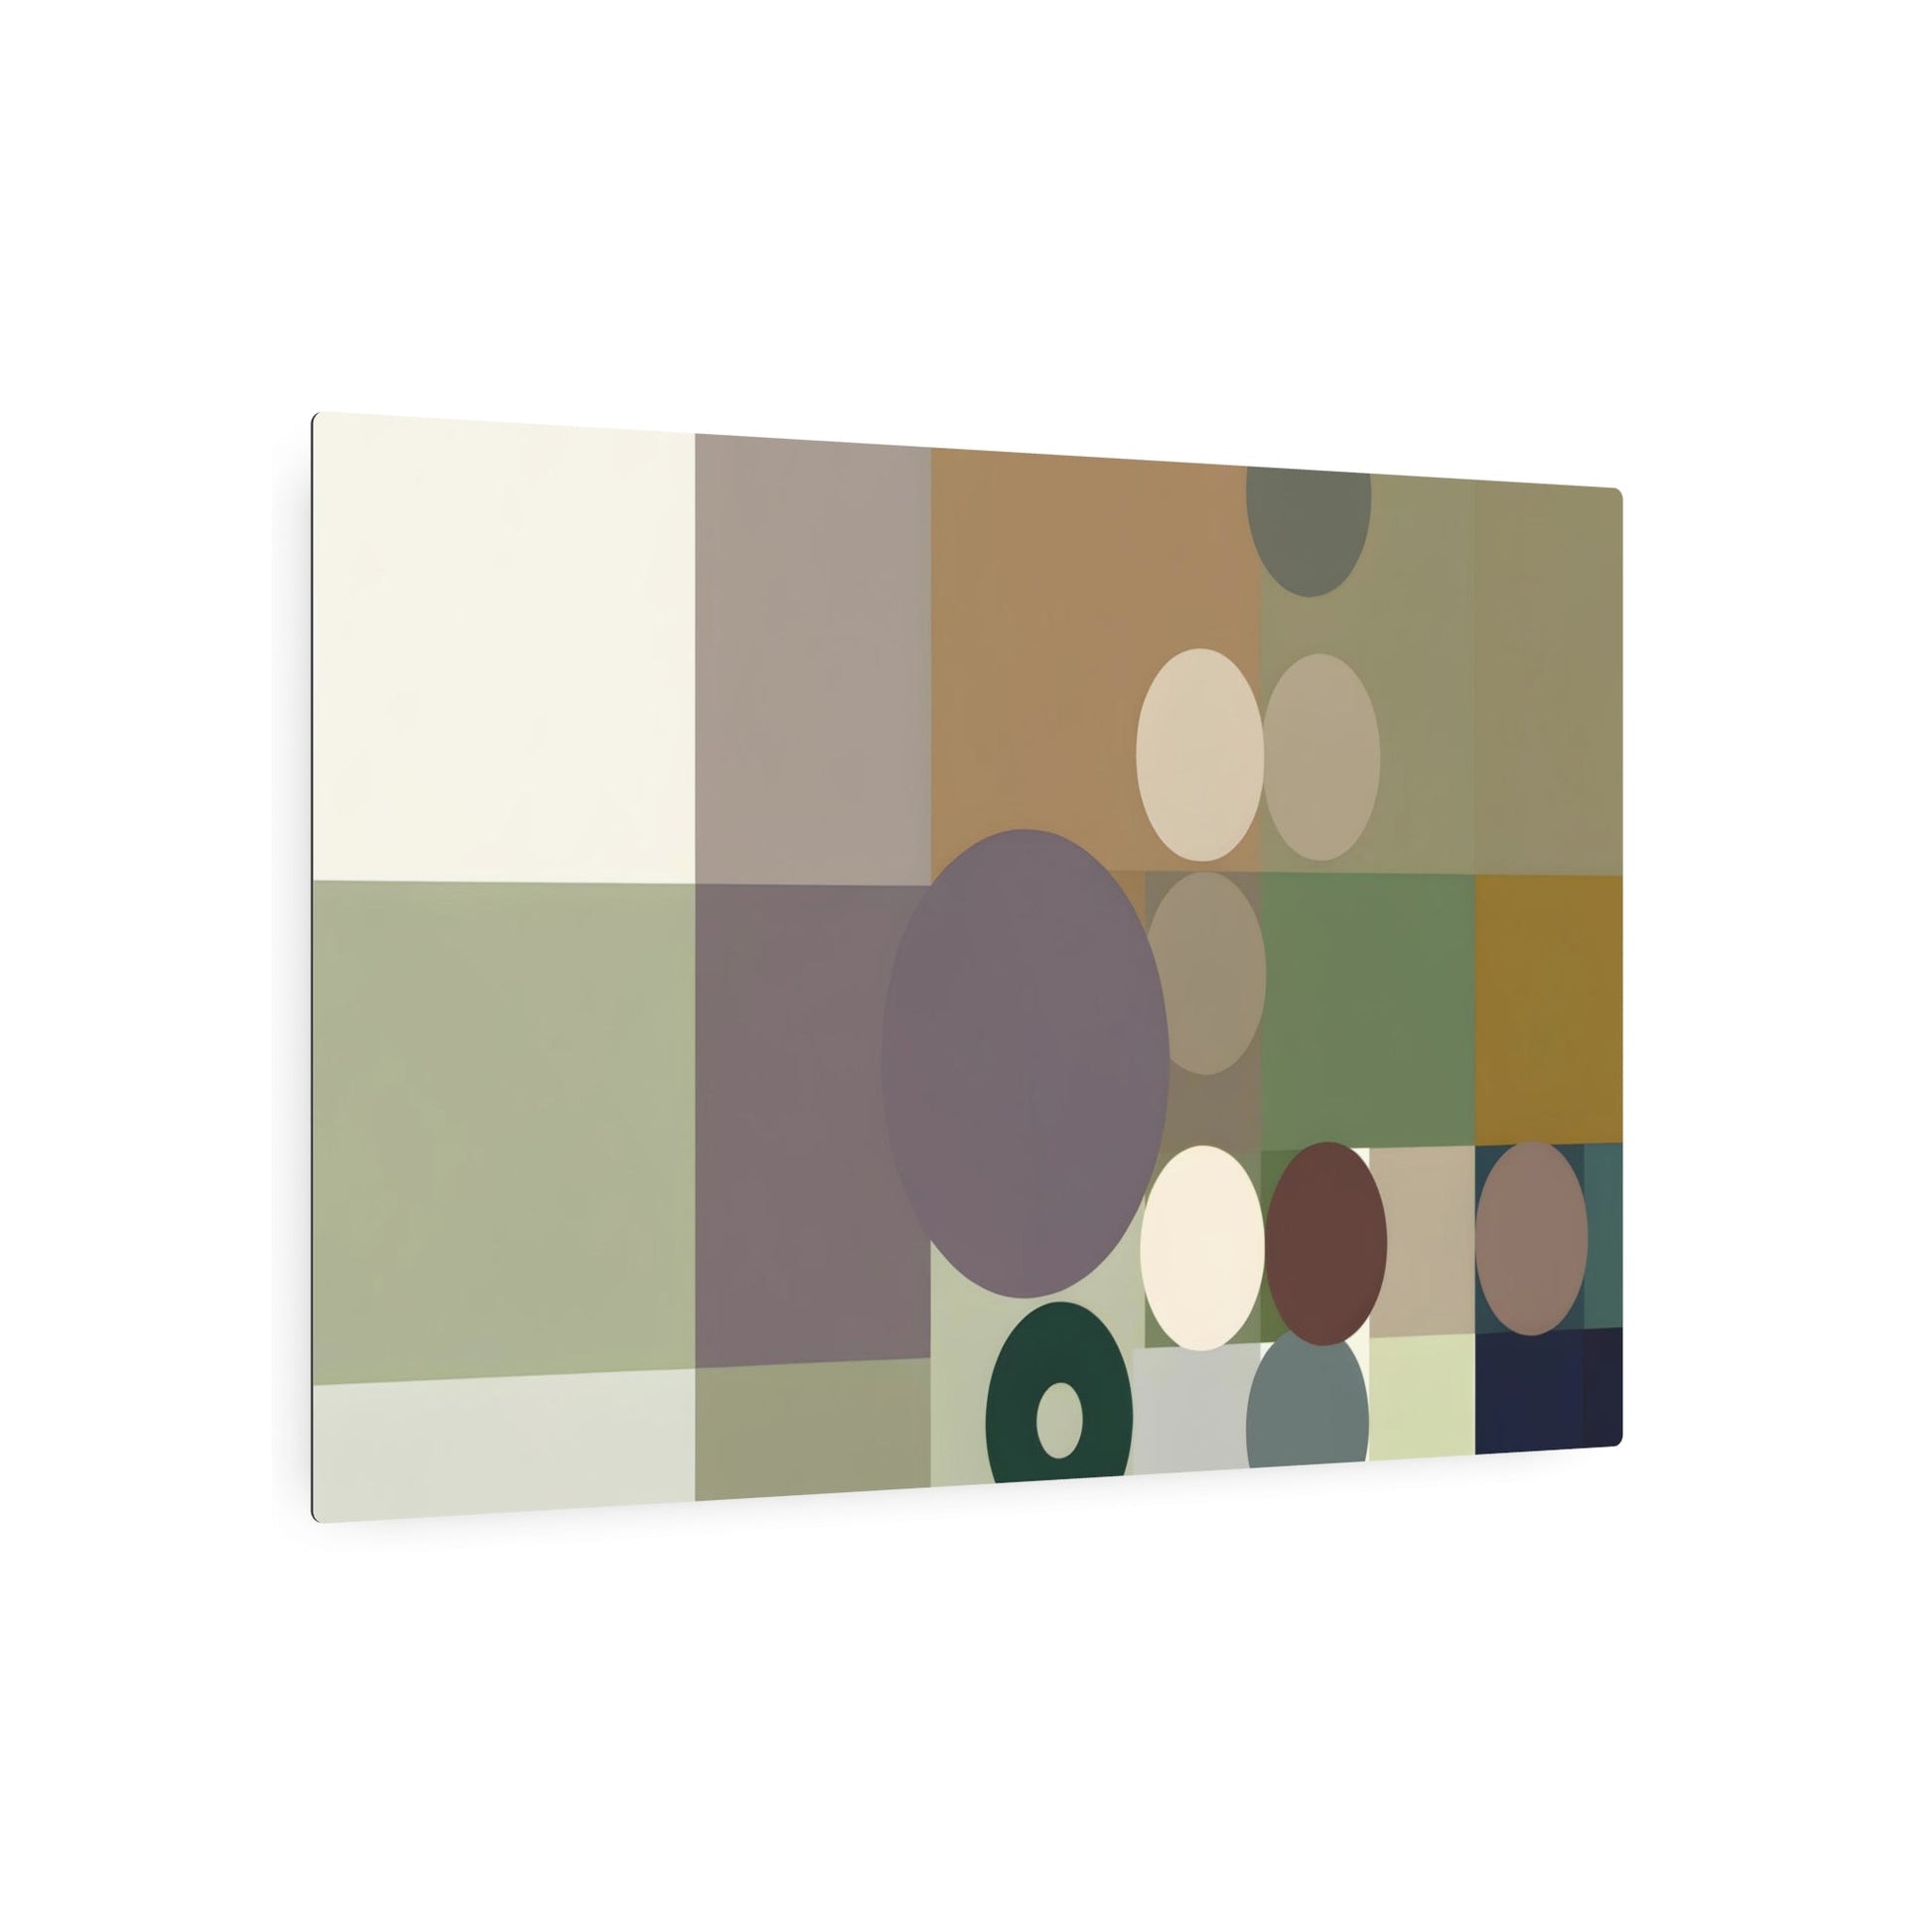 Metal Poster Art | "Modern Minimalist Geometric Artwork with Muted Colors and Negative Space - Contemporary Minimalism Style" - Metal Poster Art 36″ x 24″ (Horizontal) 0.12''